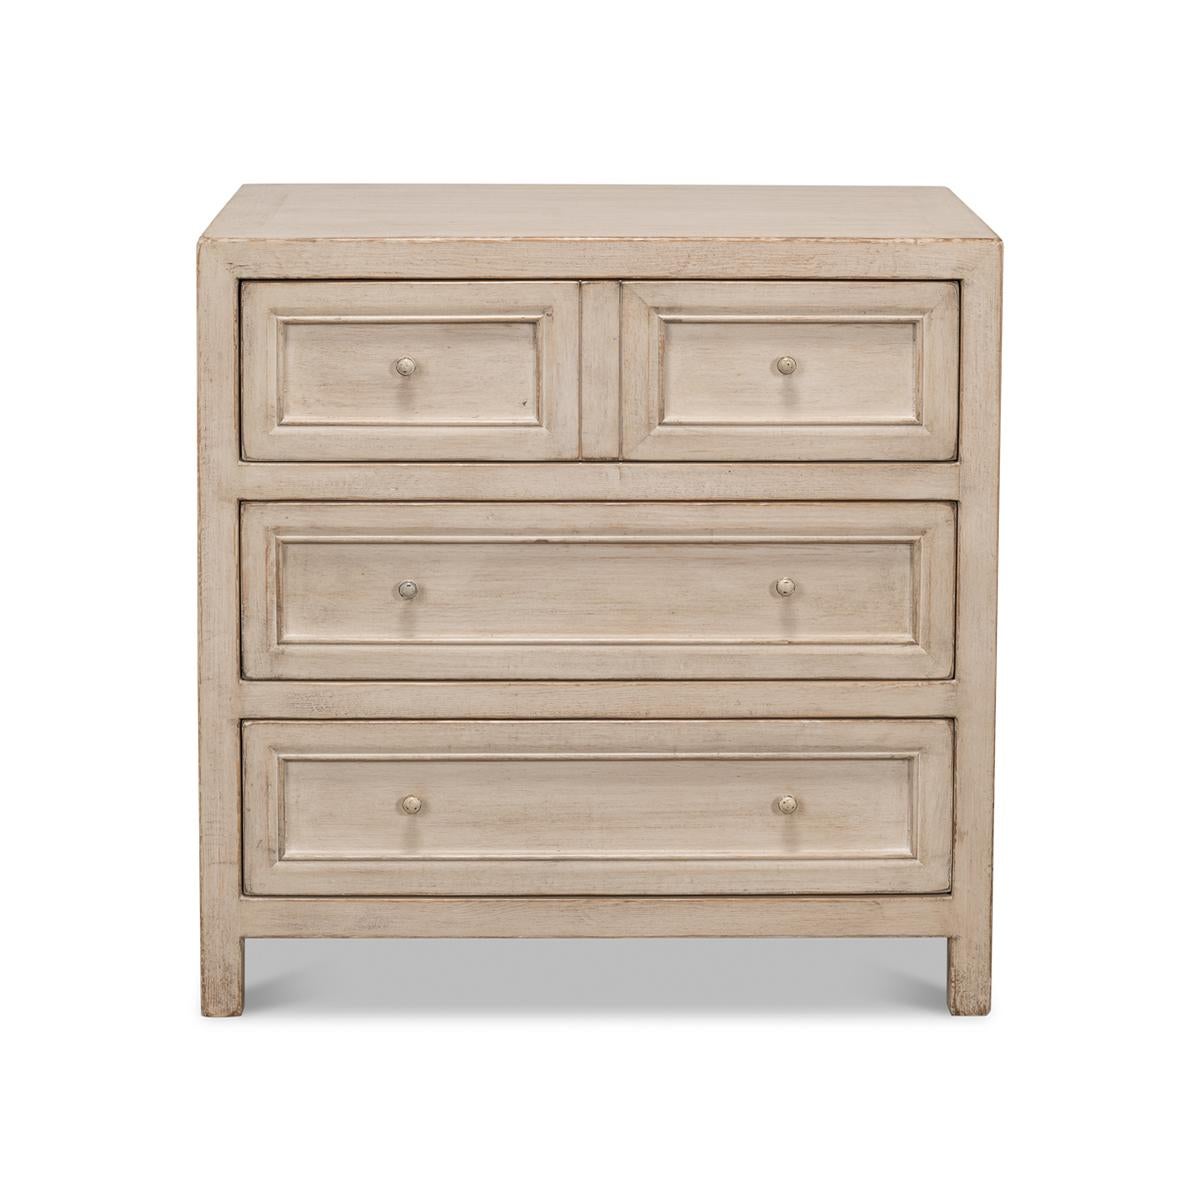 Meticulously crafted with a distressed stone grey finish, this chest exudes an authentic vintage Chinese export feel that resonates with the warmth of a cozy country cottage.

The chest features a trio of spacious drawers, each adorned with classic